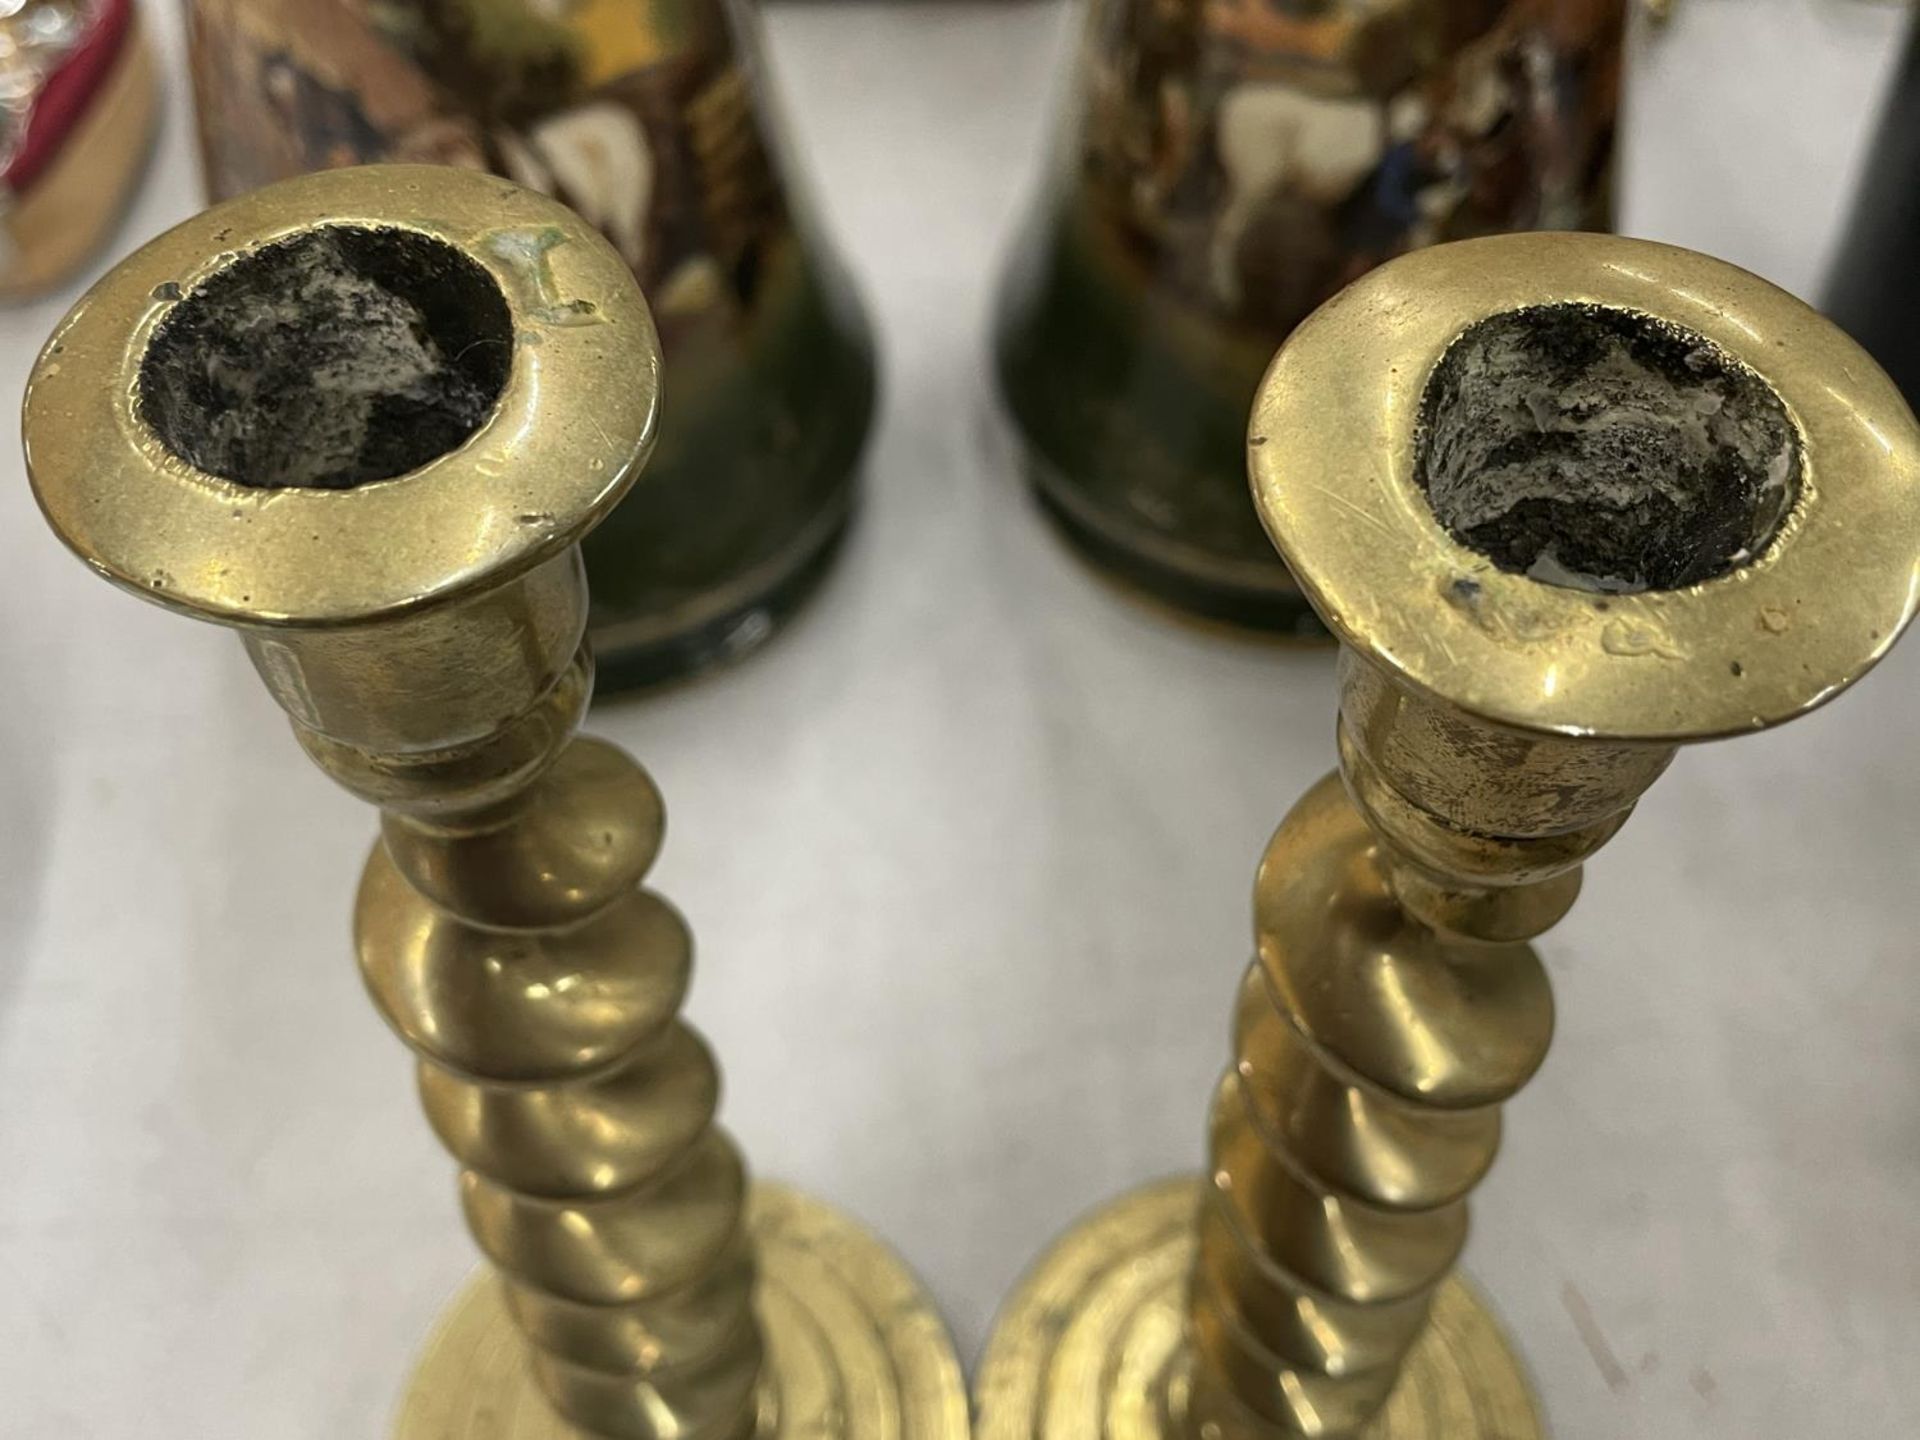 A PAIR OF HEAVY VINTAGE BRASS CANDLESTICKS WITH BARLEY TWIST STEMS, HEIGHT 23CM - Image 3 of 3